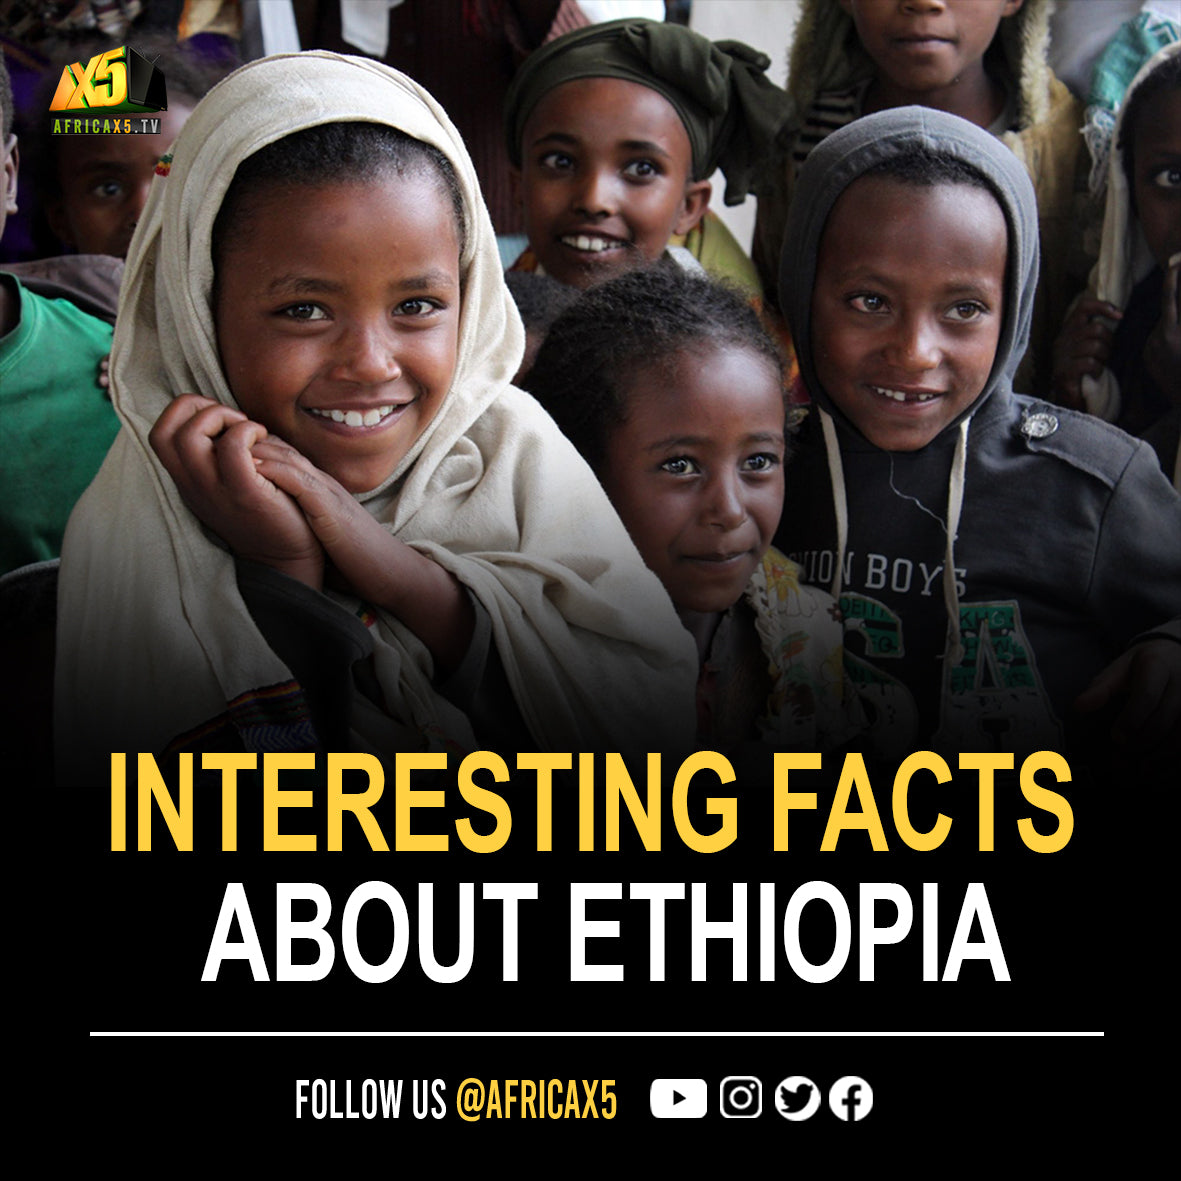 INTERESTING FACTS ABOUT ETHIOPIA